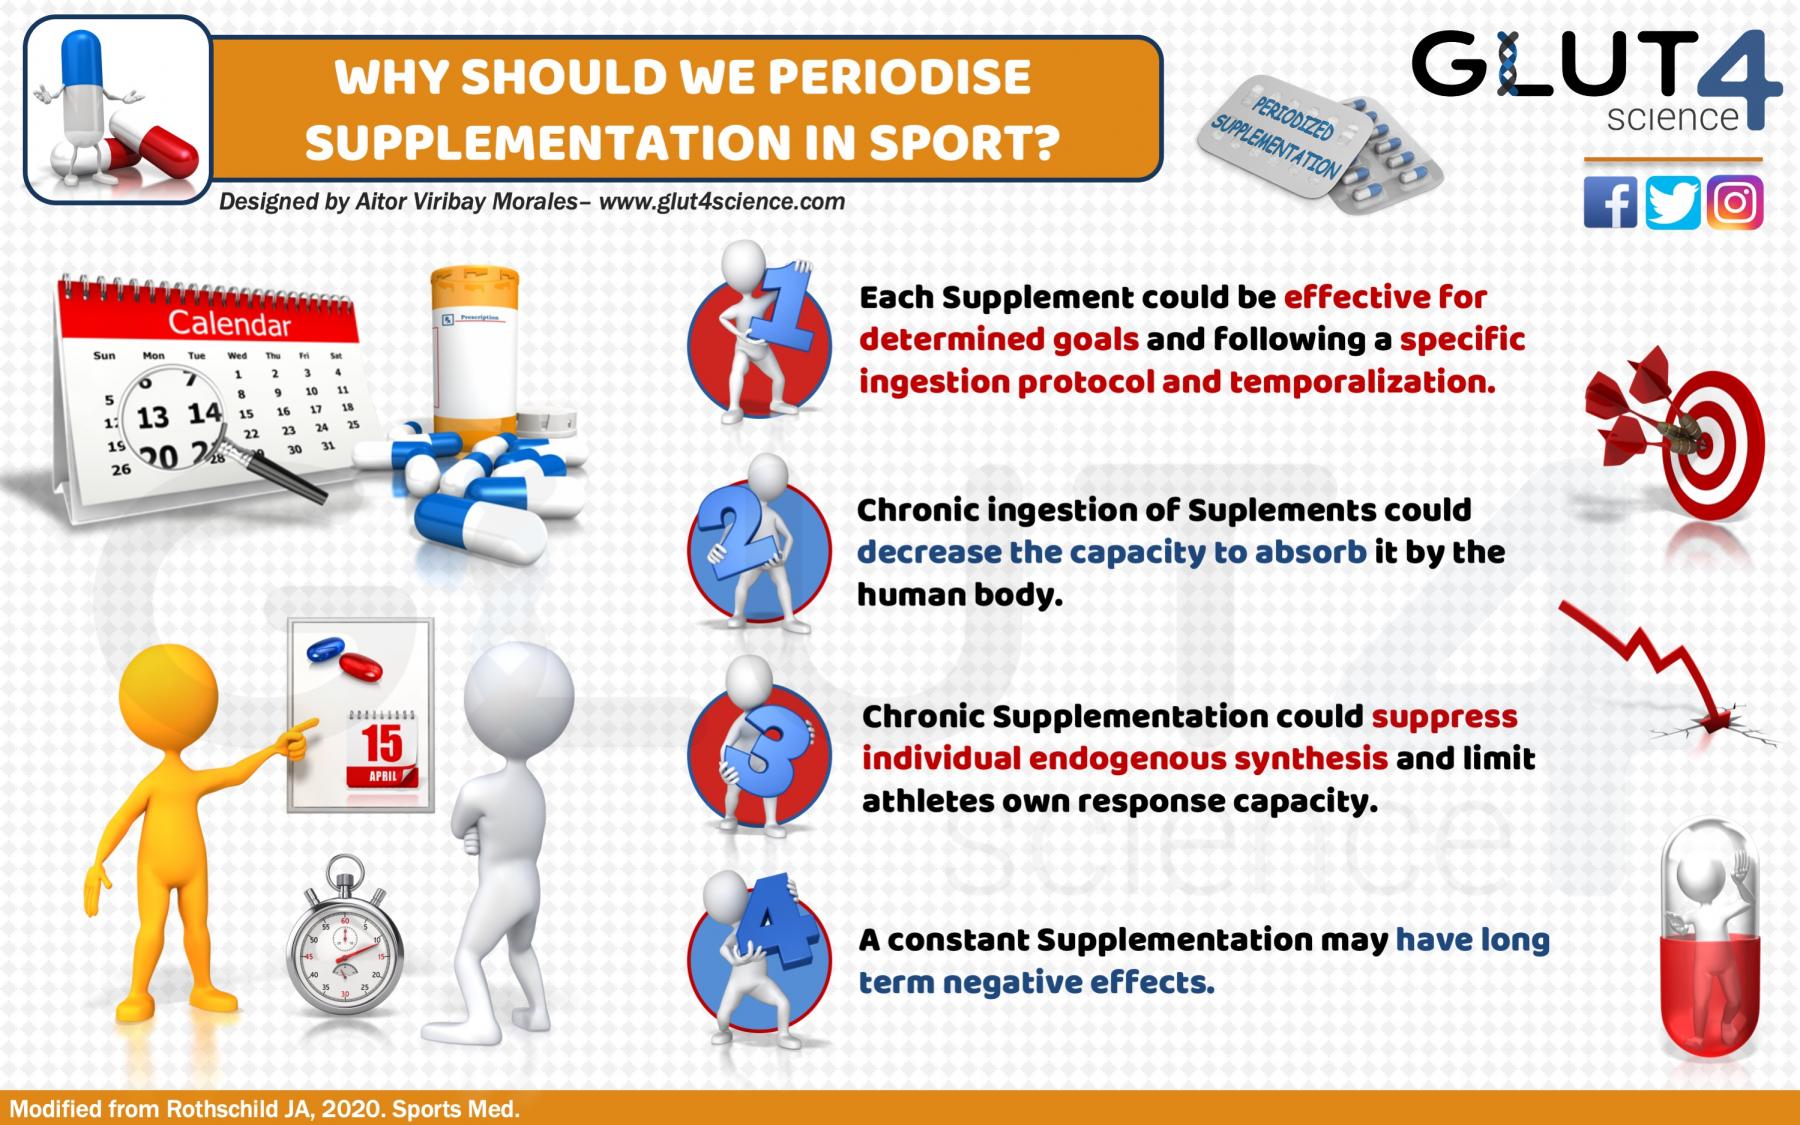 Why to periodize supplementation in sport?